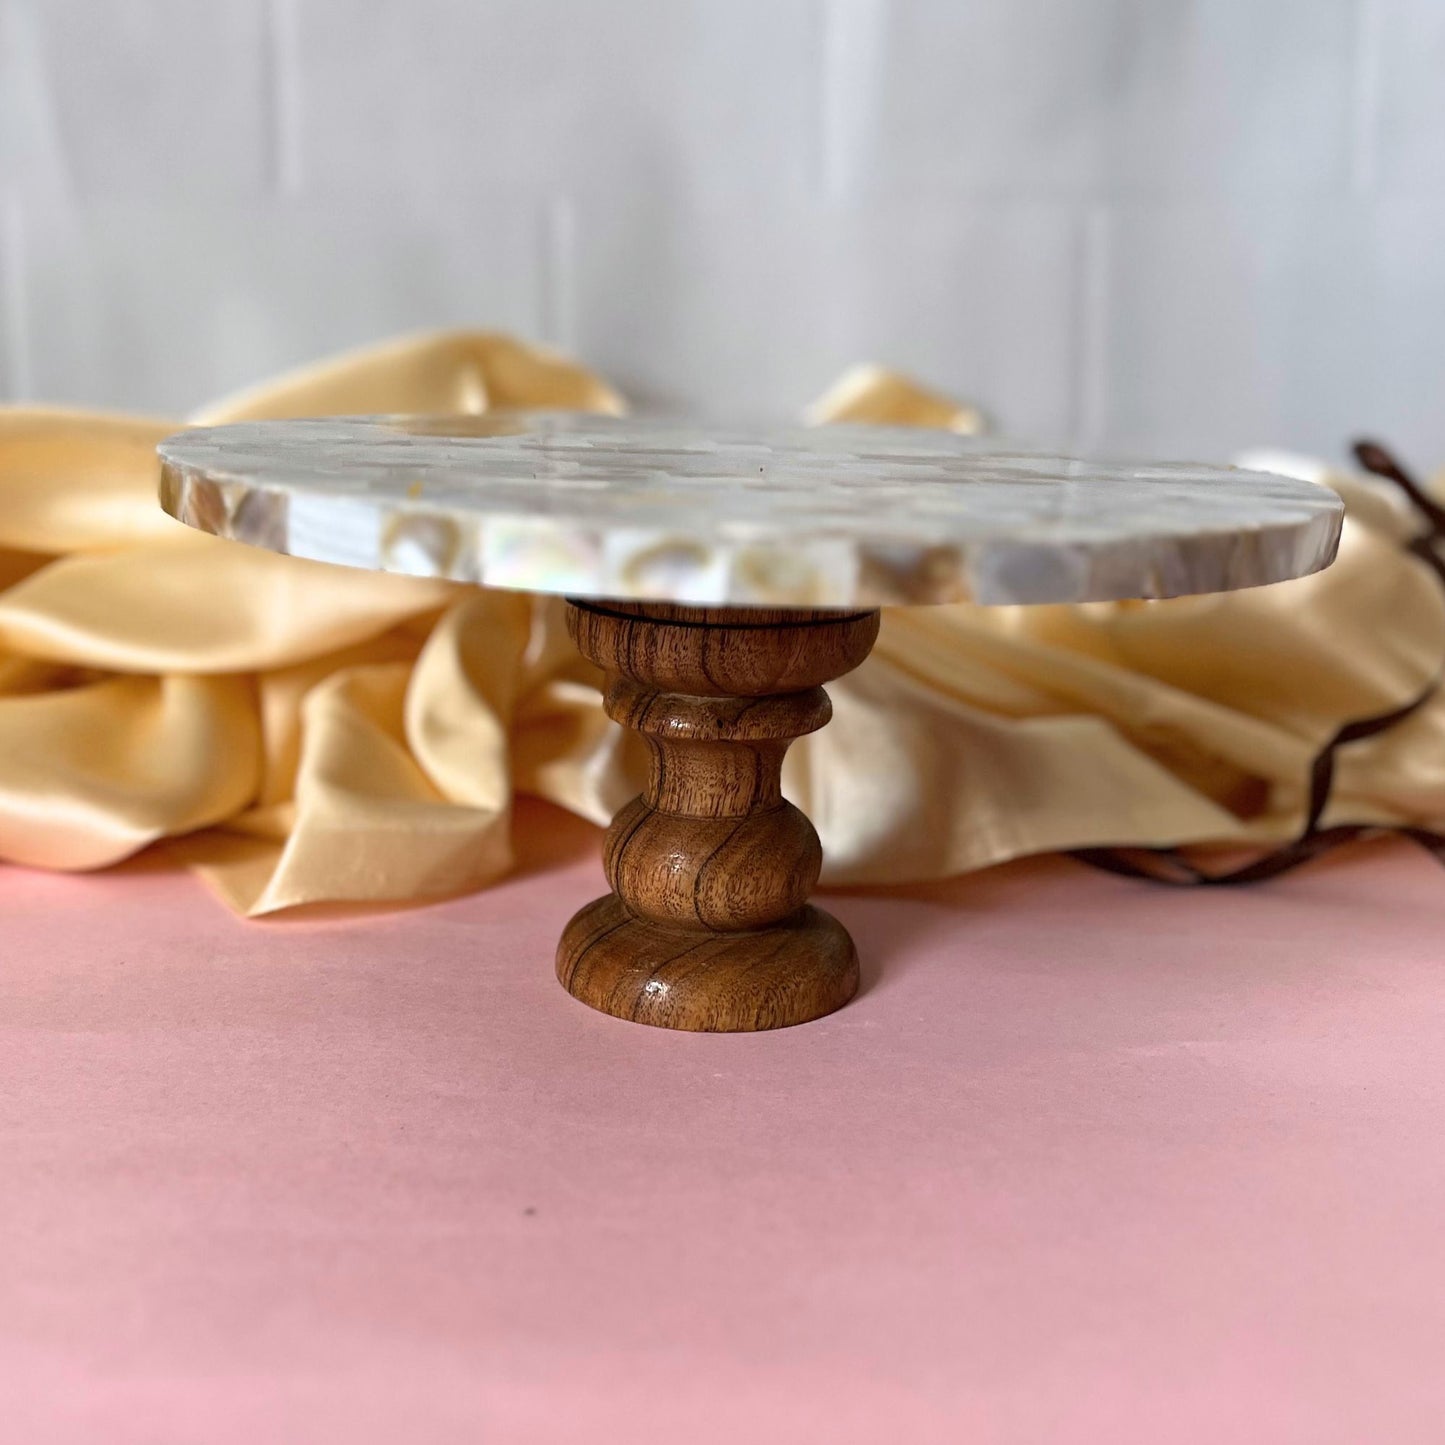 Round Mother Of Pearl Cake Stand with wooden Stand Cupcake Display Stand for Dessert Weddings Birthdays and Multipurpose - White